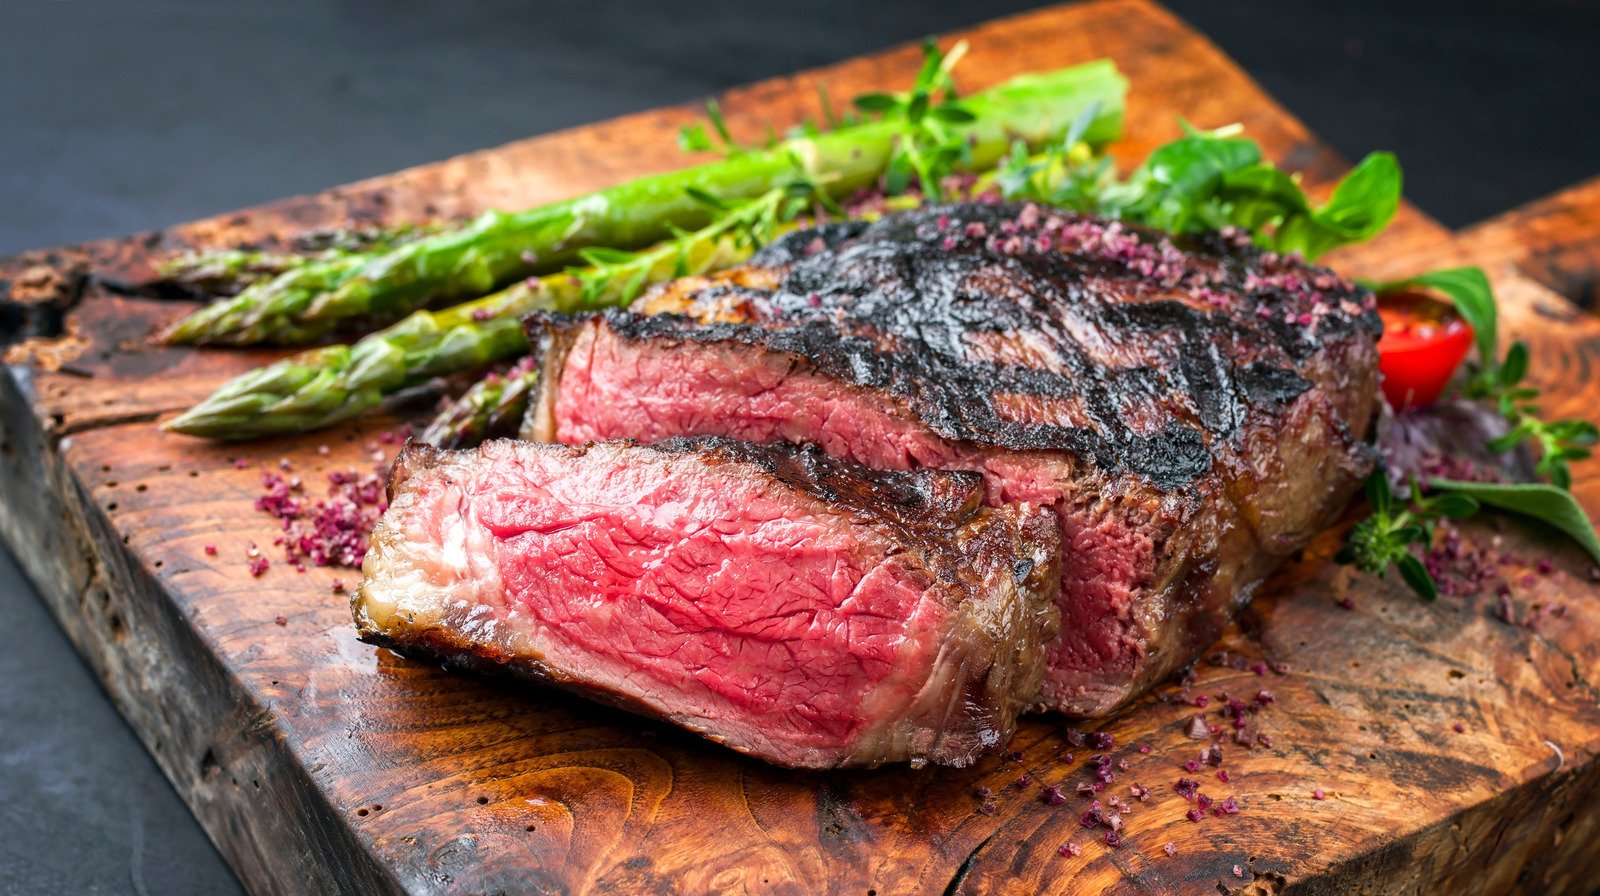 Chain Restaurant Steaks, Ranked From Worst To Best